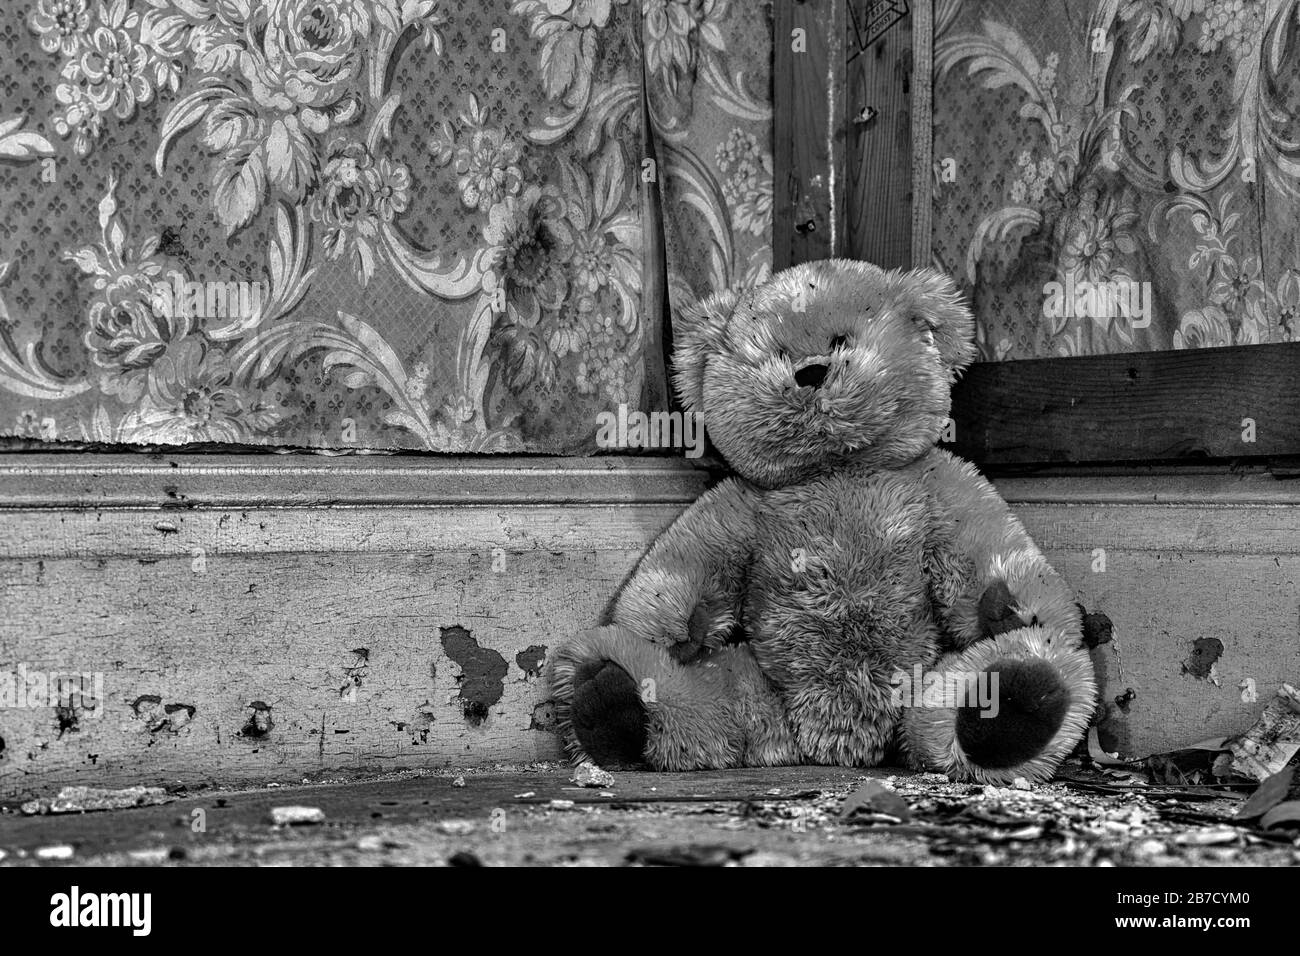 A dirty teddy bear sitting in the corner in an old, abandoned house. Debris on the floor and wallpaper peeling from the wall. Black and white. Stock Photo